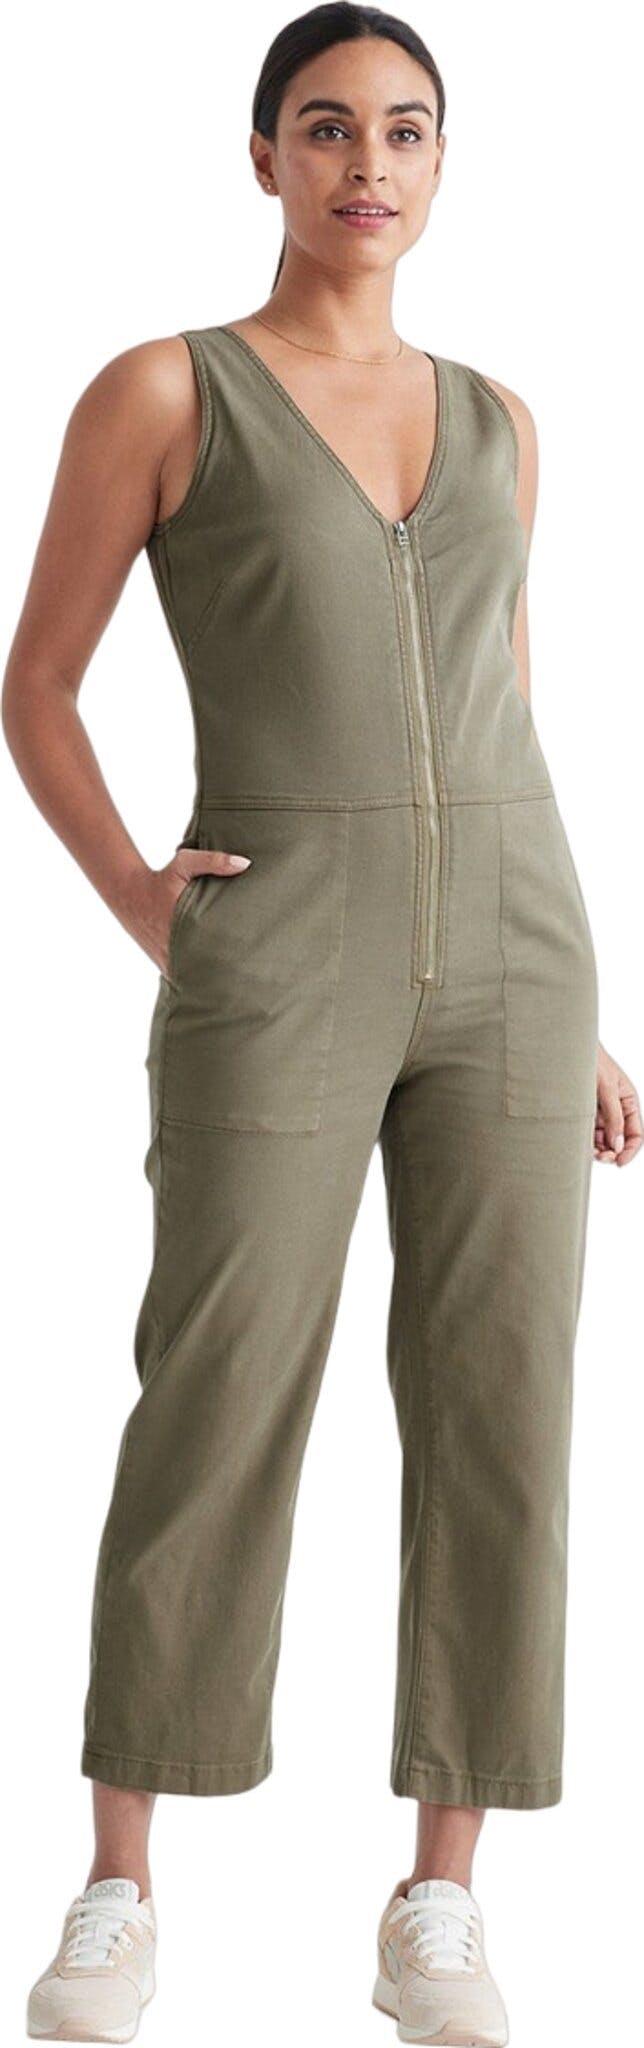 Product image for Live Free Jumpsuit - Women's